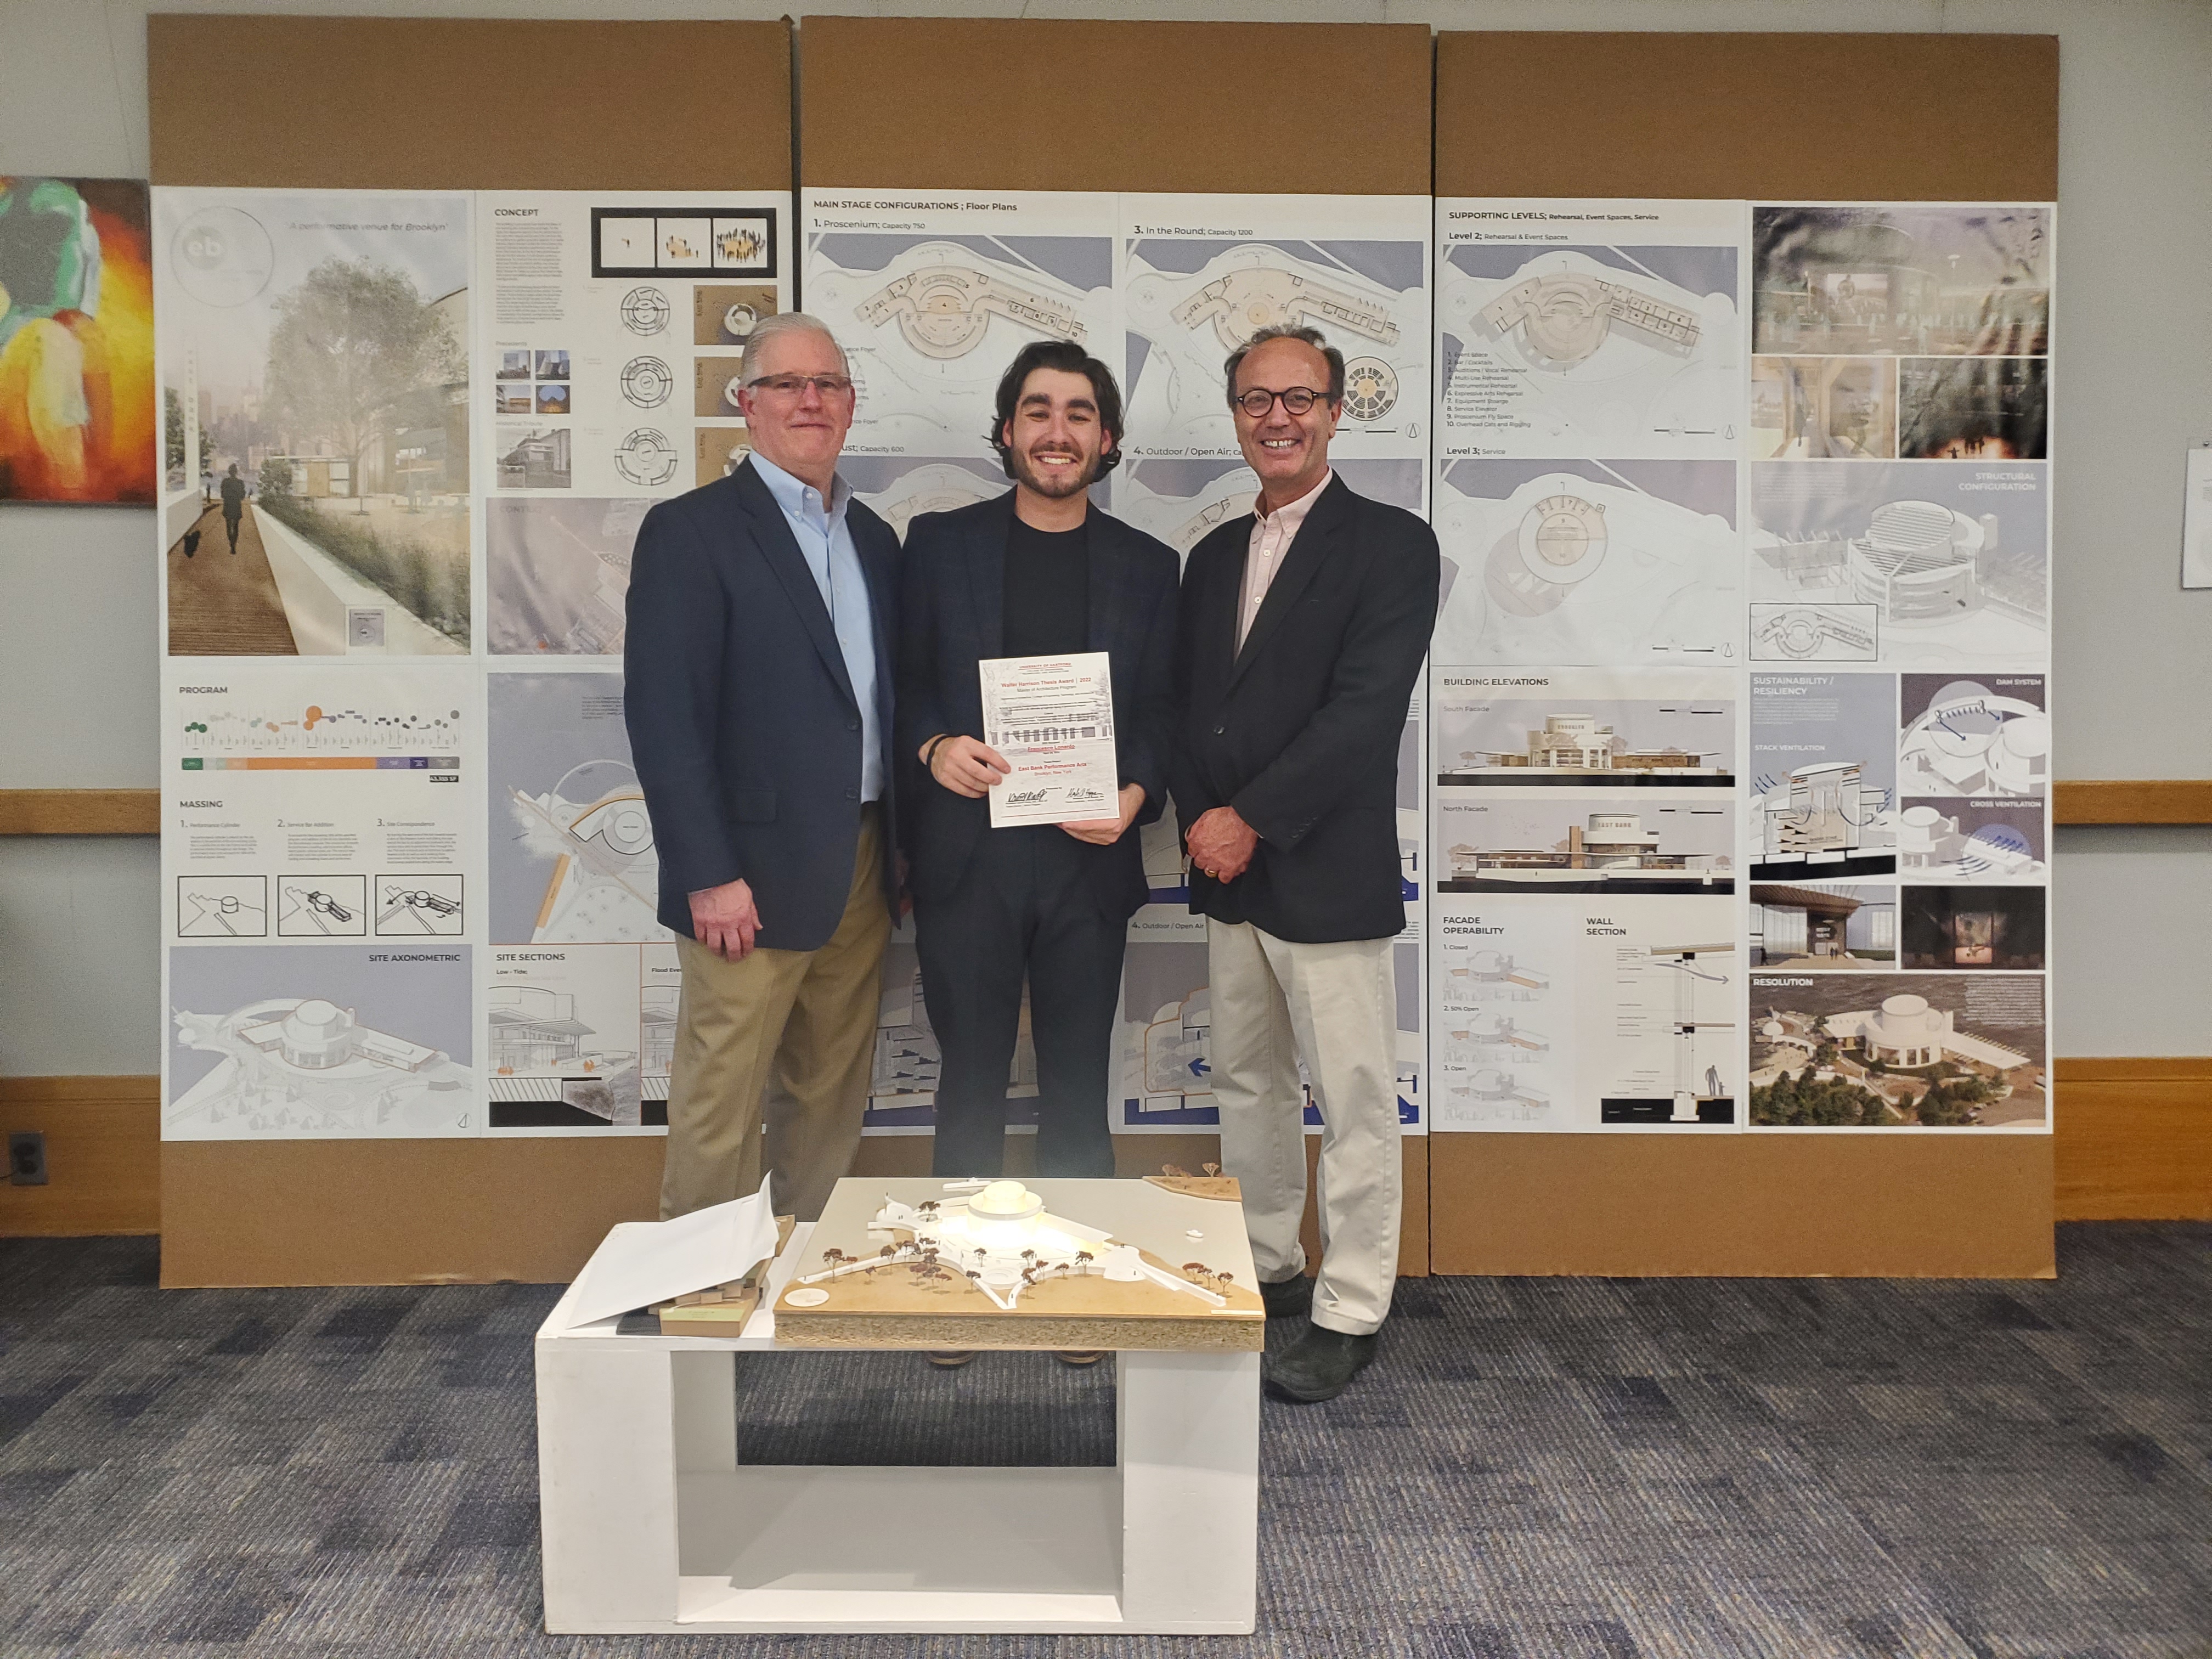 The photo includes from left to right: Mark Hopper, AIA (Adjunct Professor), Francesco Lonardo (MArch candidate and employee at Amenta Emma), and Daniel Davis, AIA (Professor).